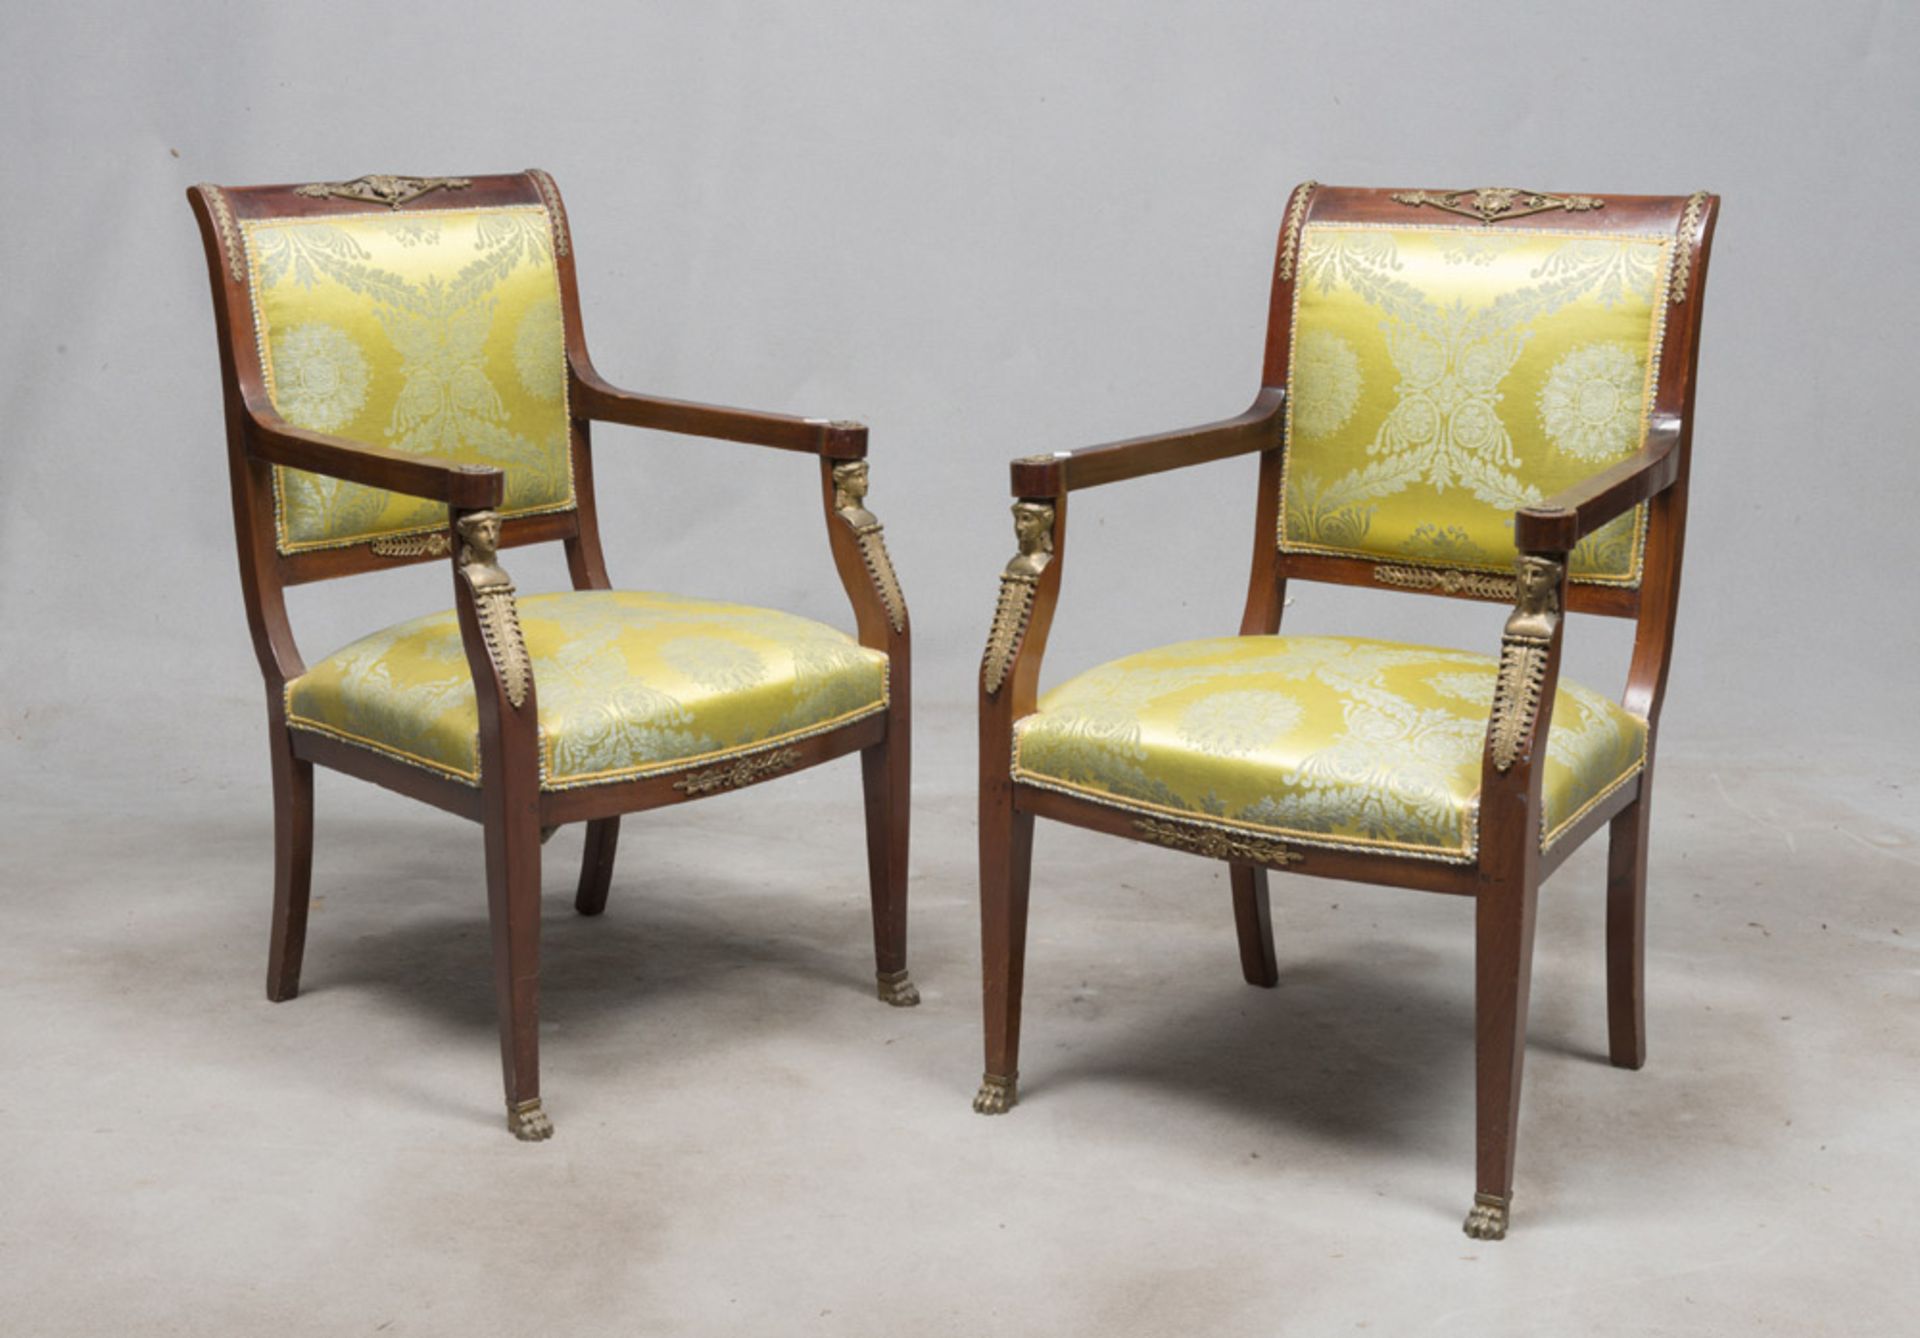 PAIR OF SMALL ARMCHARIS IN MAHOGANY – PERIOD OF HTE SECOND EMPIRE